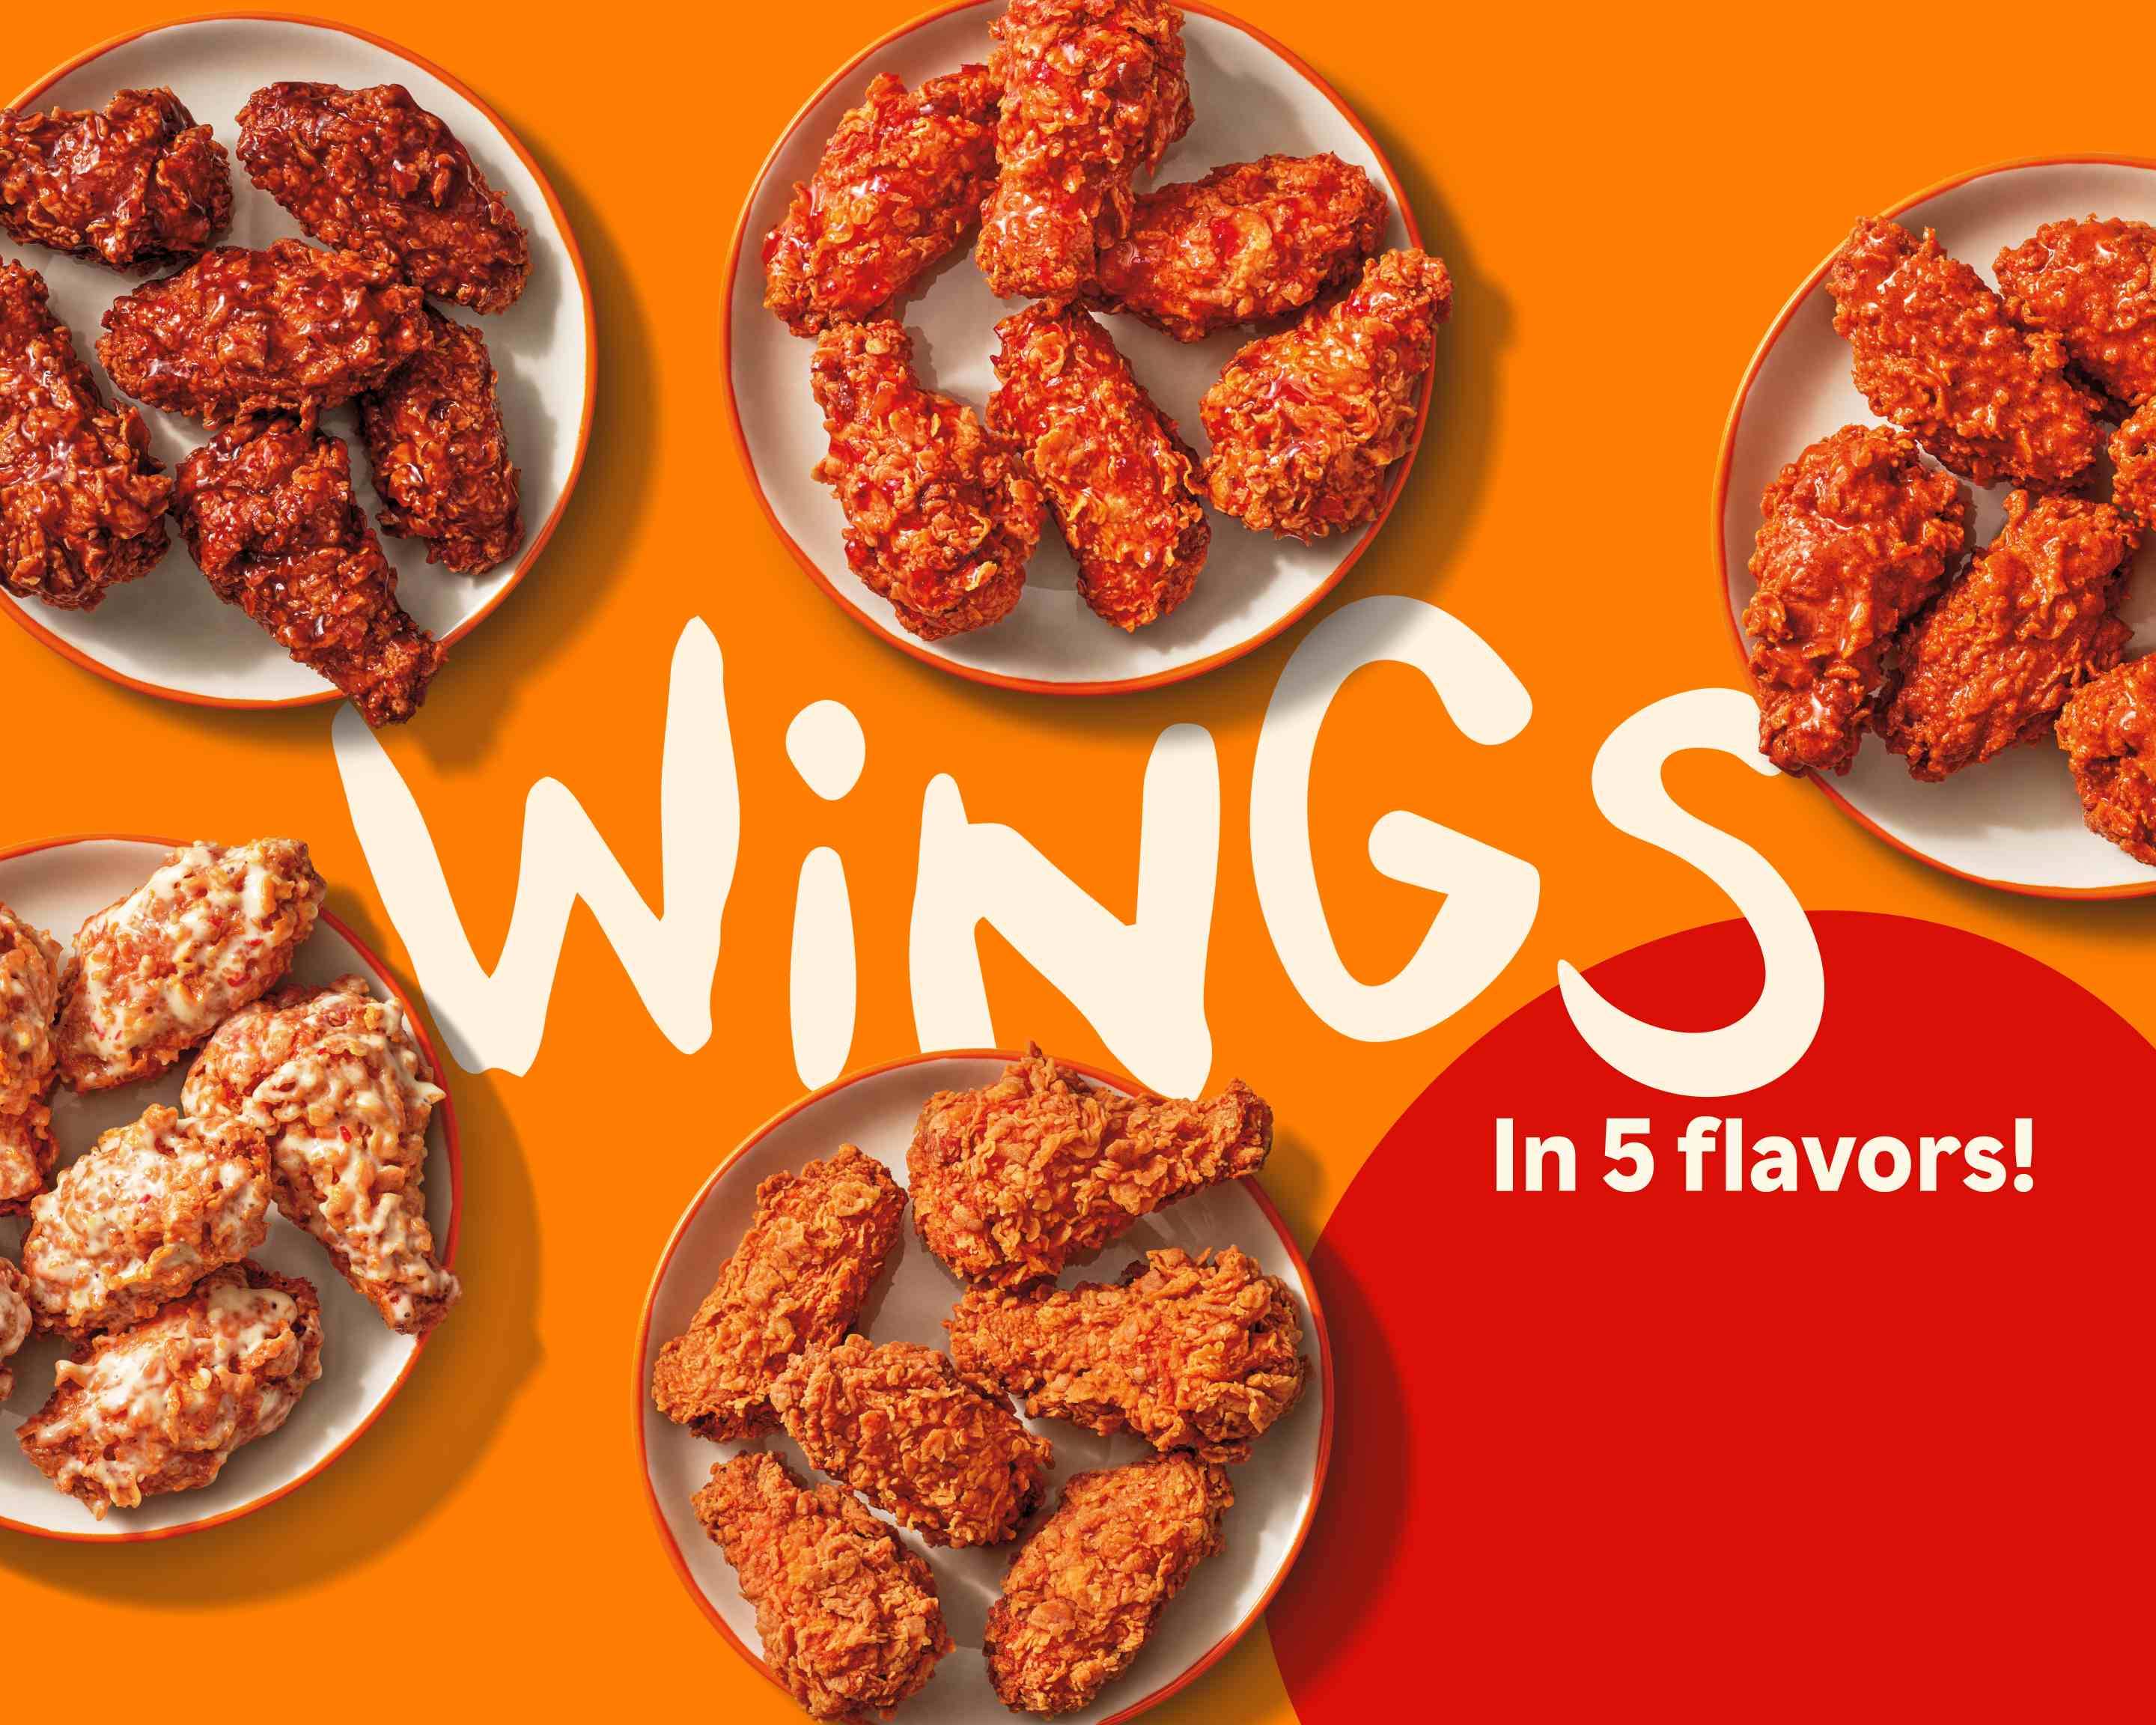 Popeyes Adds Mouthwatering New Chicken Wing Flavor to the Menu